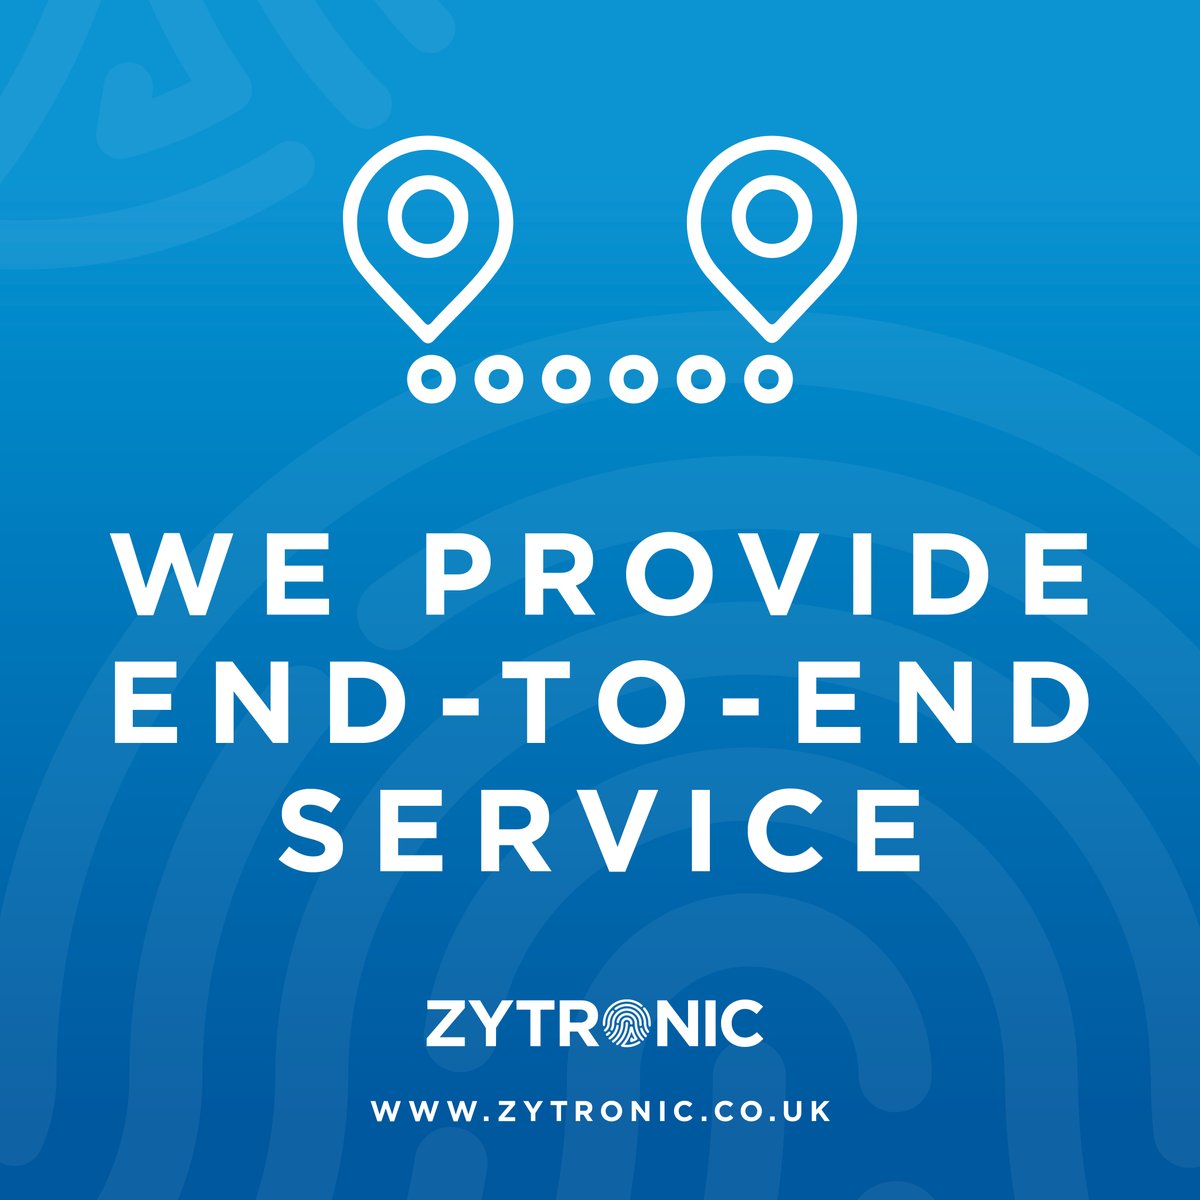 At Zytronic, we provide you with an end-to-end service. We #manufacture, customise and shape your #touchscreen solution at our in-house facilities. We have the #expertise to carry out screen printing, thermal tempering and more! Discover more: zytronic.co.uk/contact/